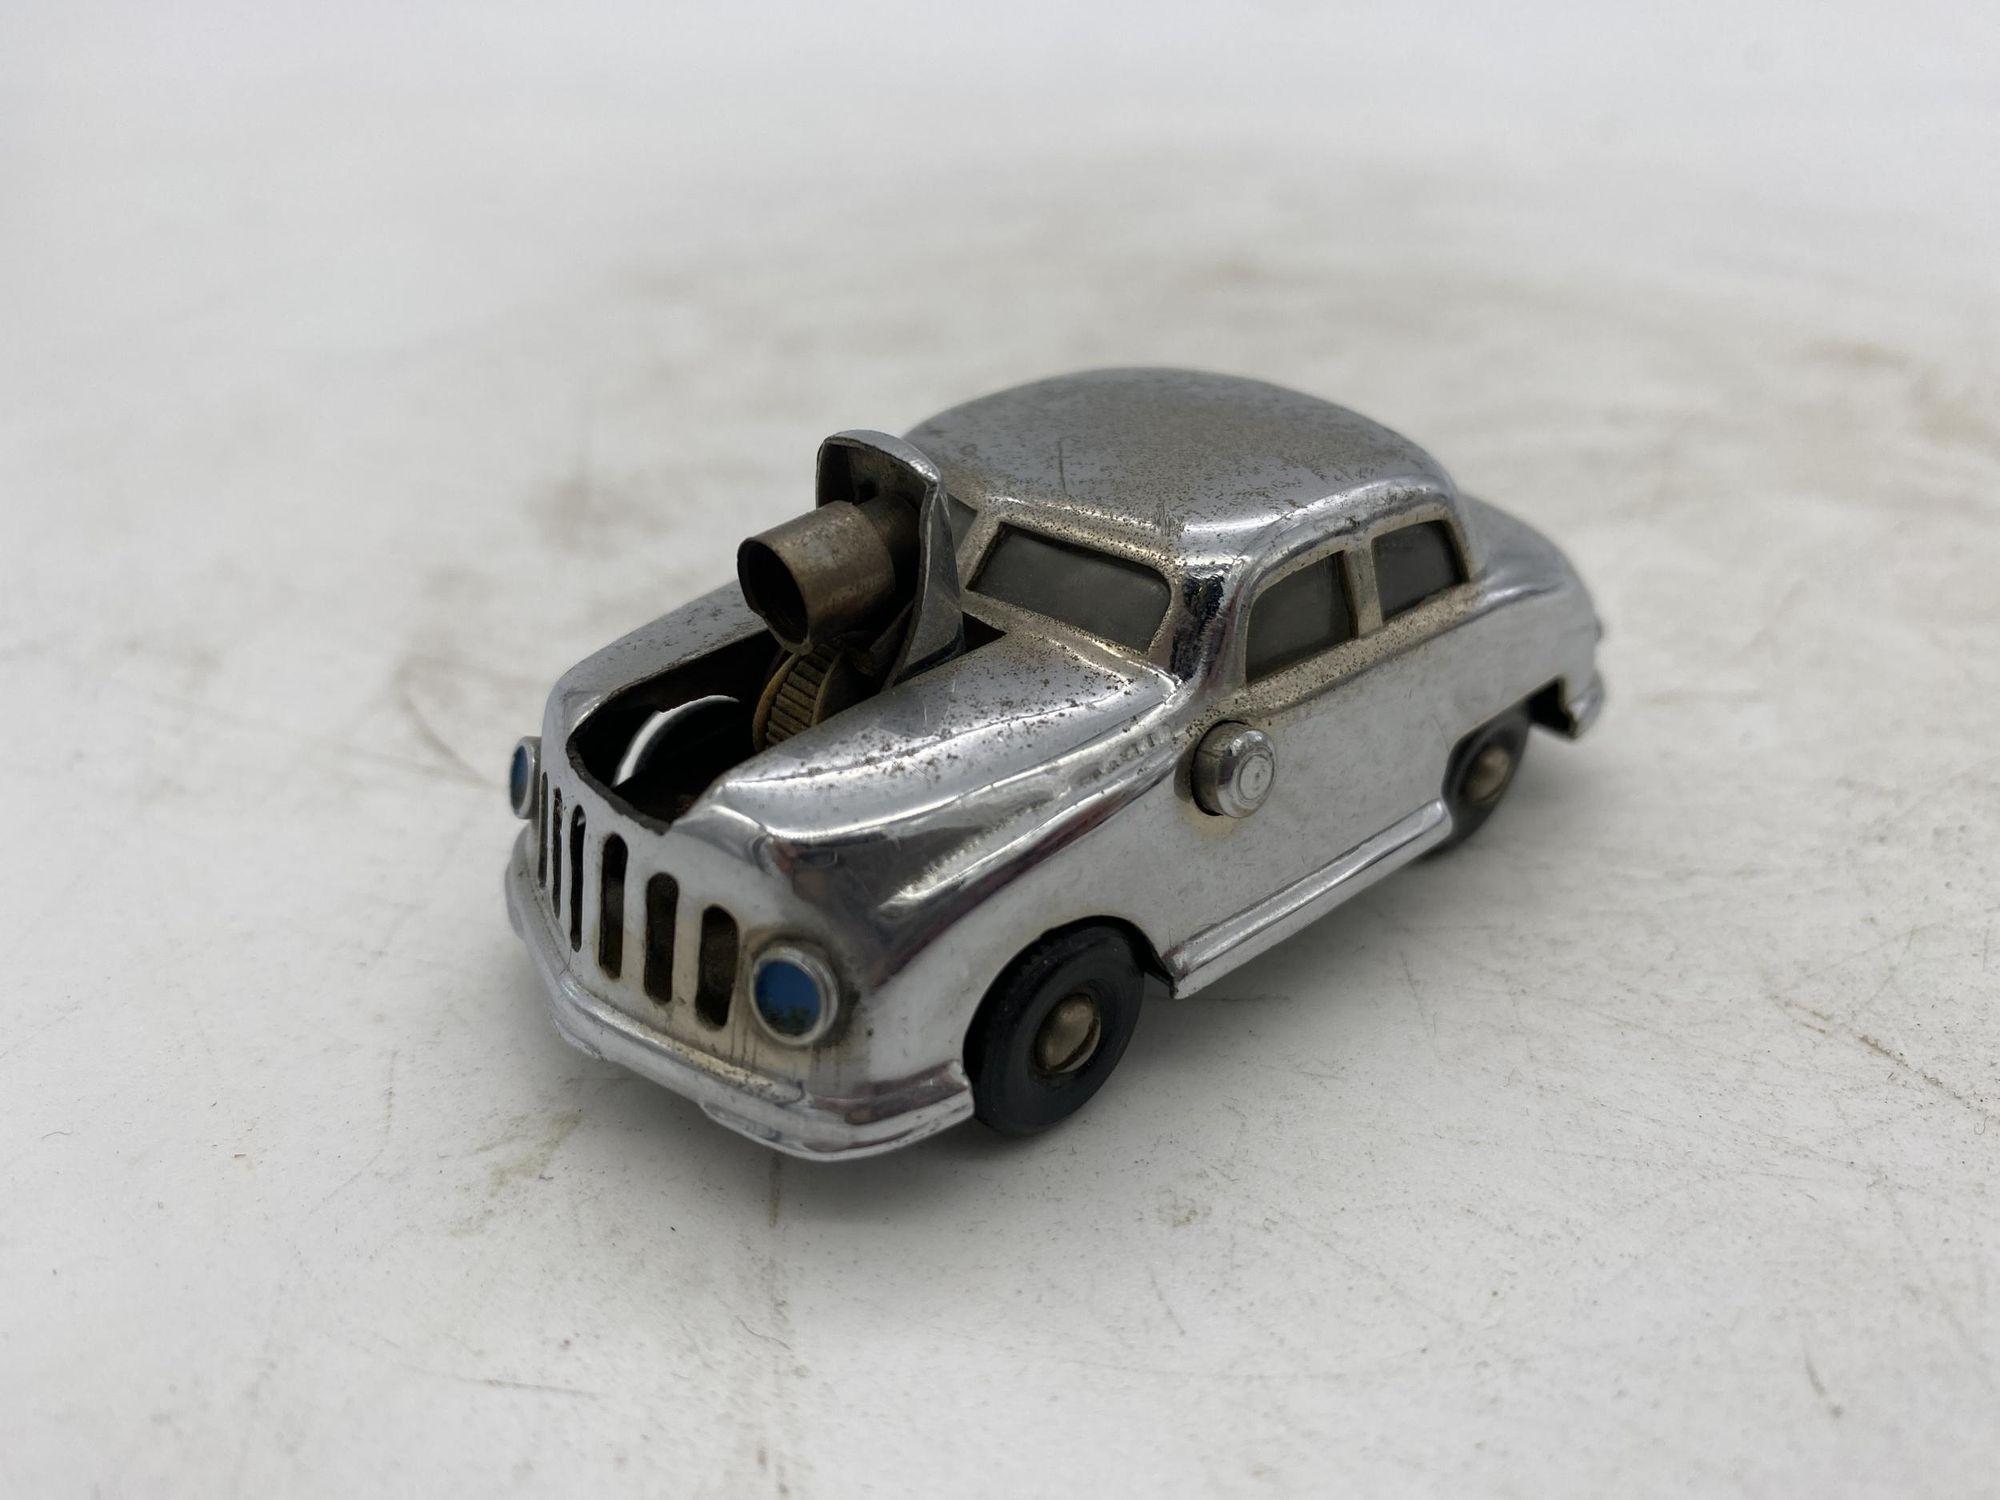 Figural Lucky Car Automobile Cigarette table lighter made in occupied Japan.

Condition is good with wear to the middle portion that pops up appropriate for age and use. Comes in working condition just add fluid.

Measuring: 2-3/4